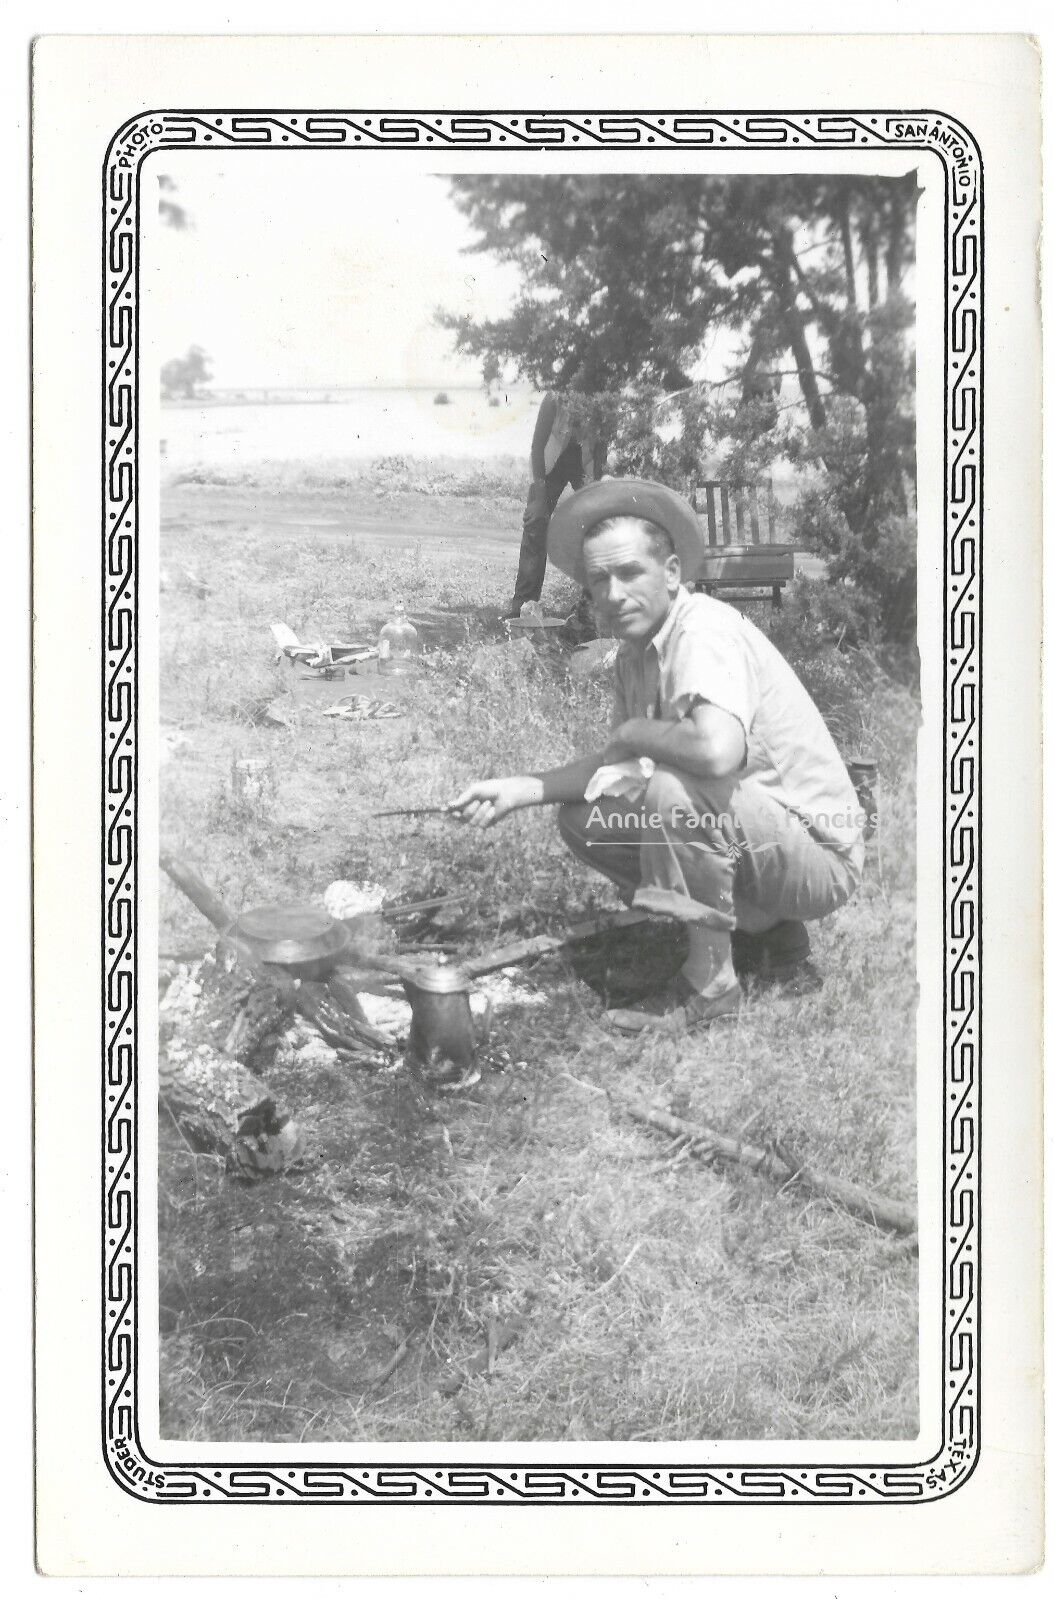 Man in Hat Cooking Campfire Lake Camping Fishing Vintage Found Photo